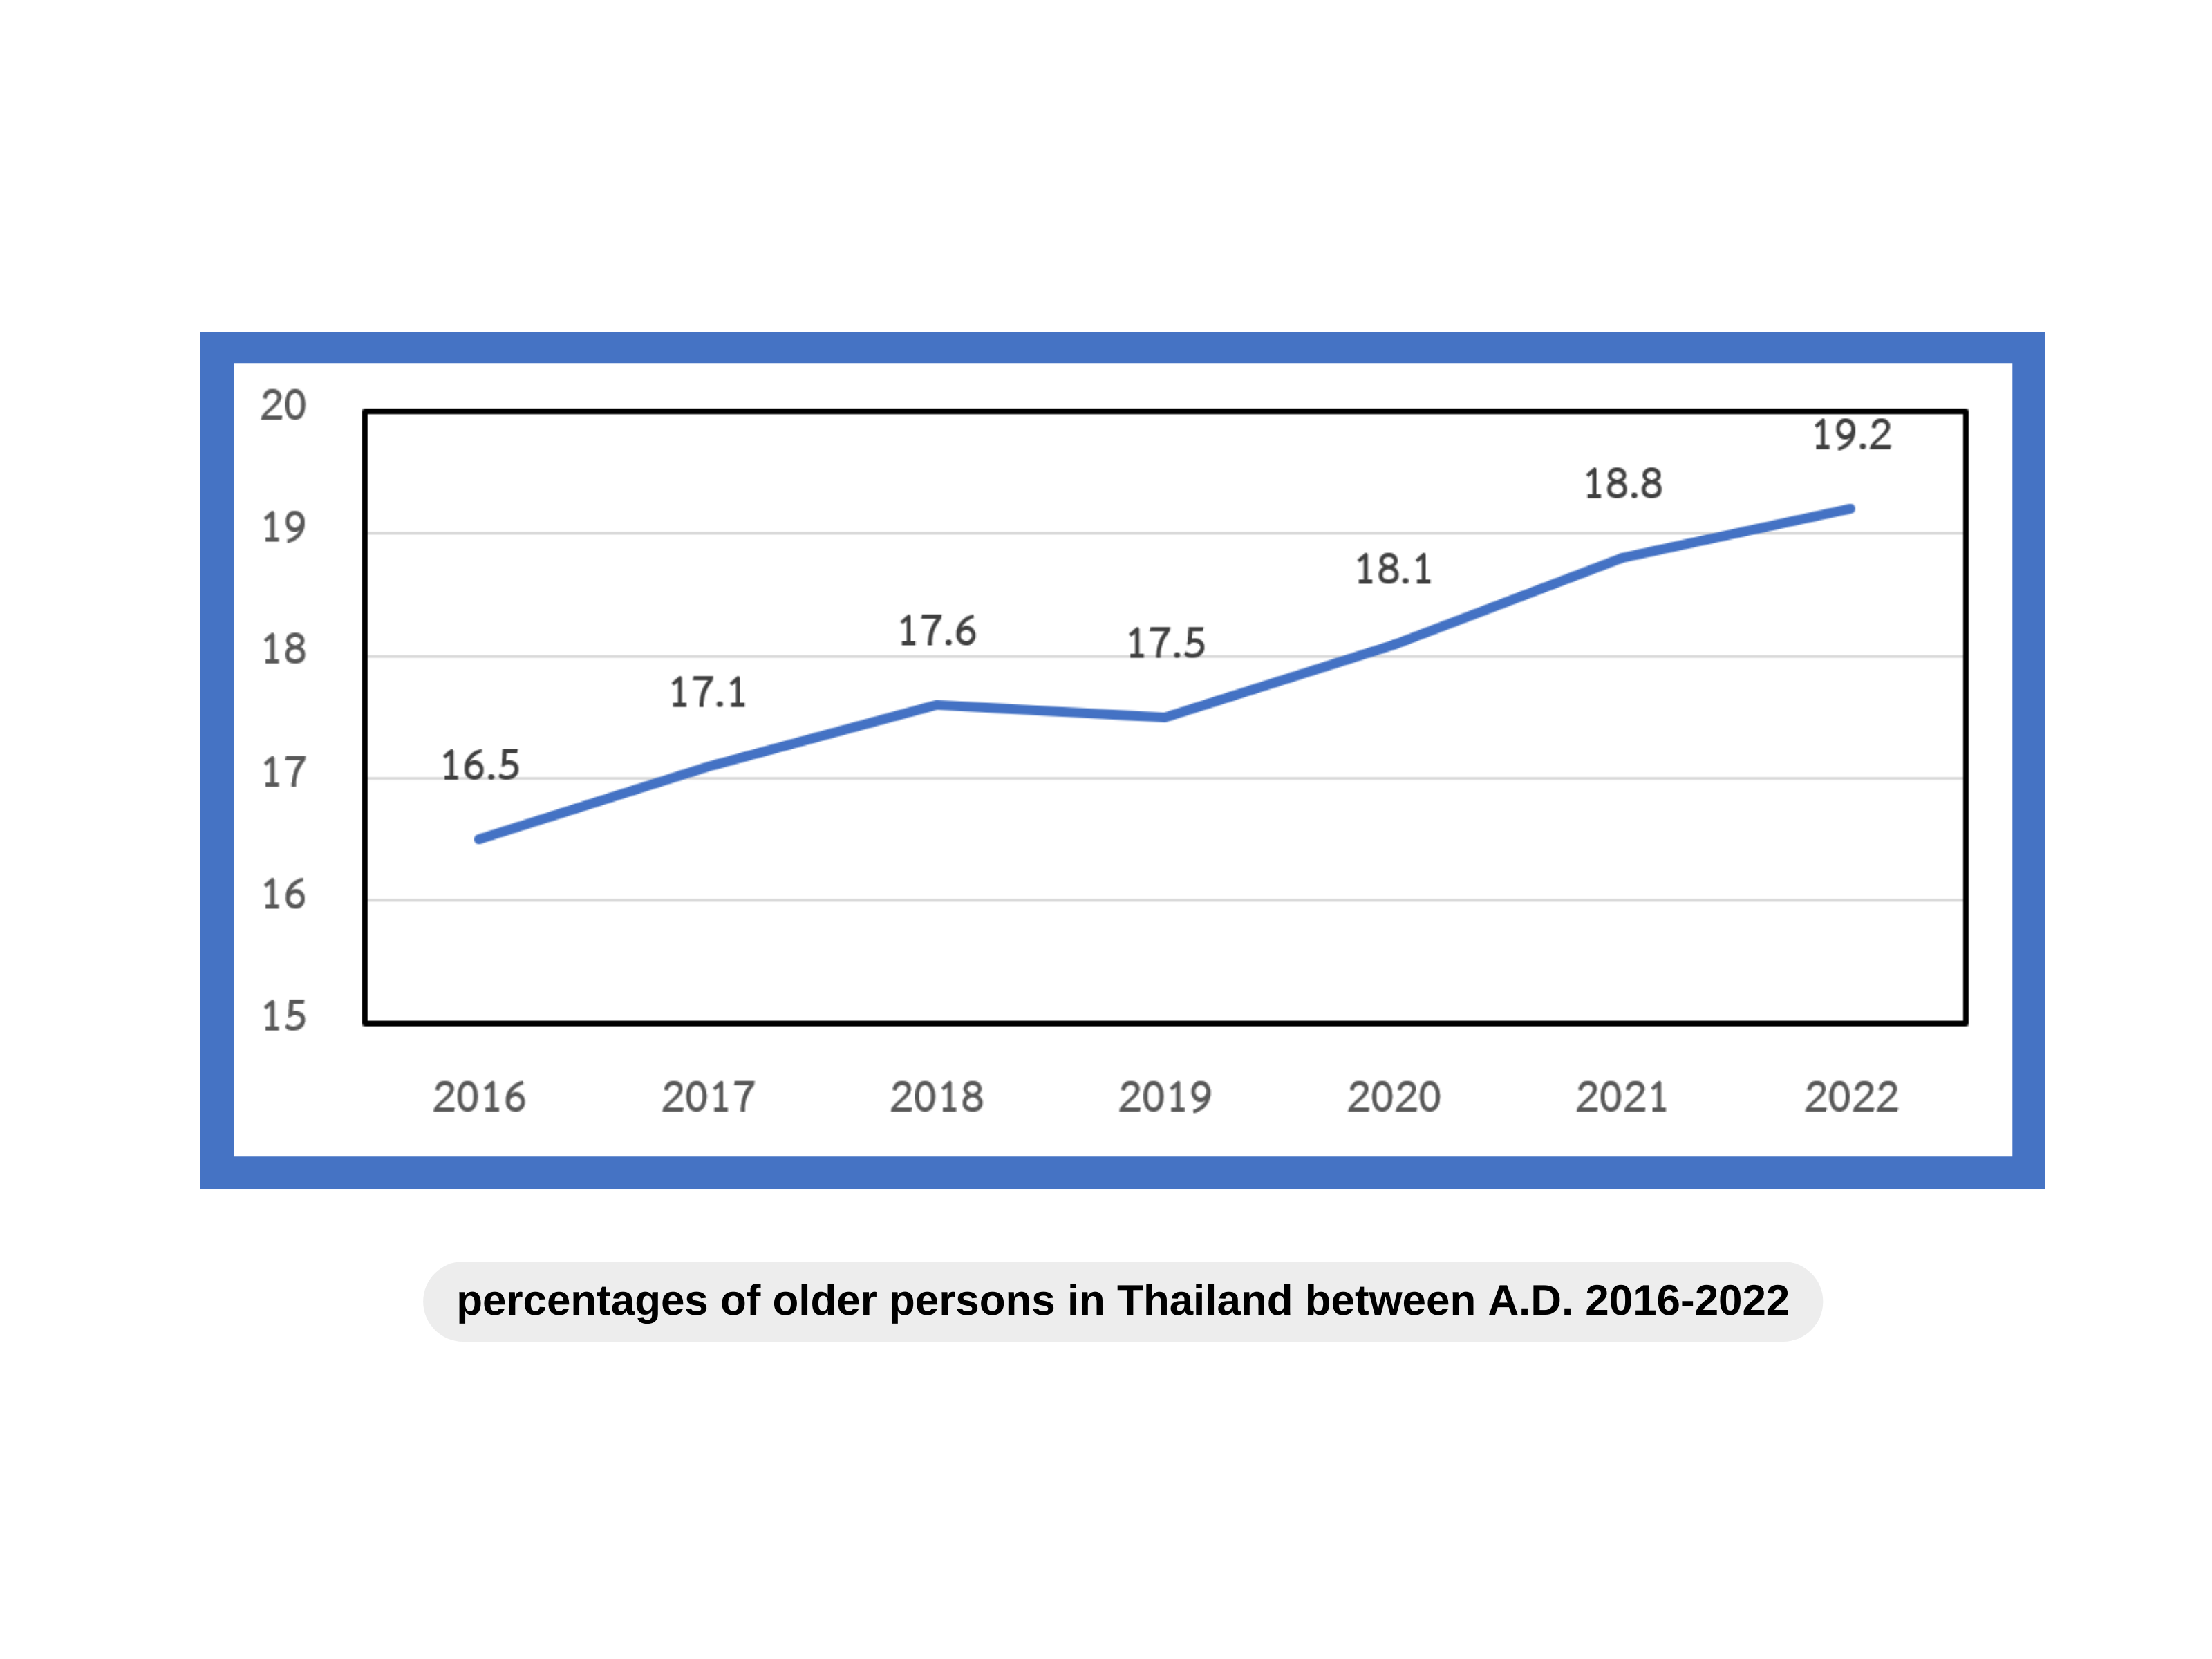 Analysis of Aging Society in Thailand between A.D. 2016-2022